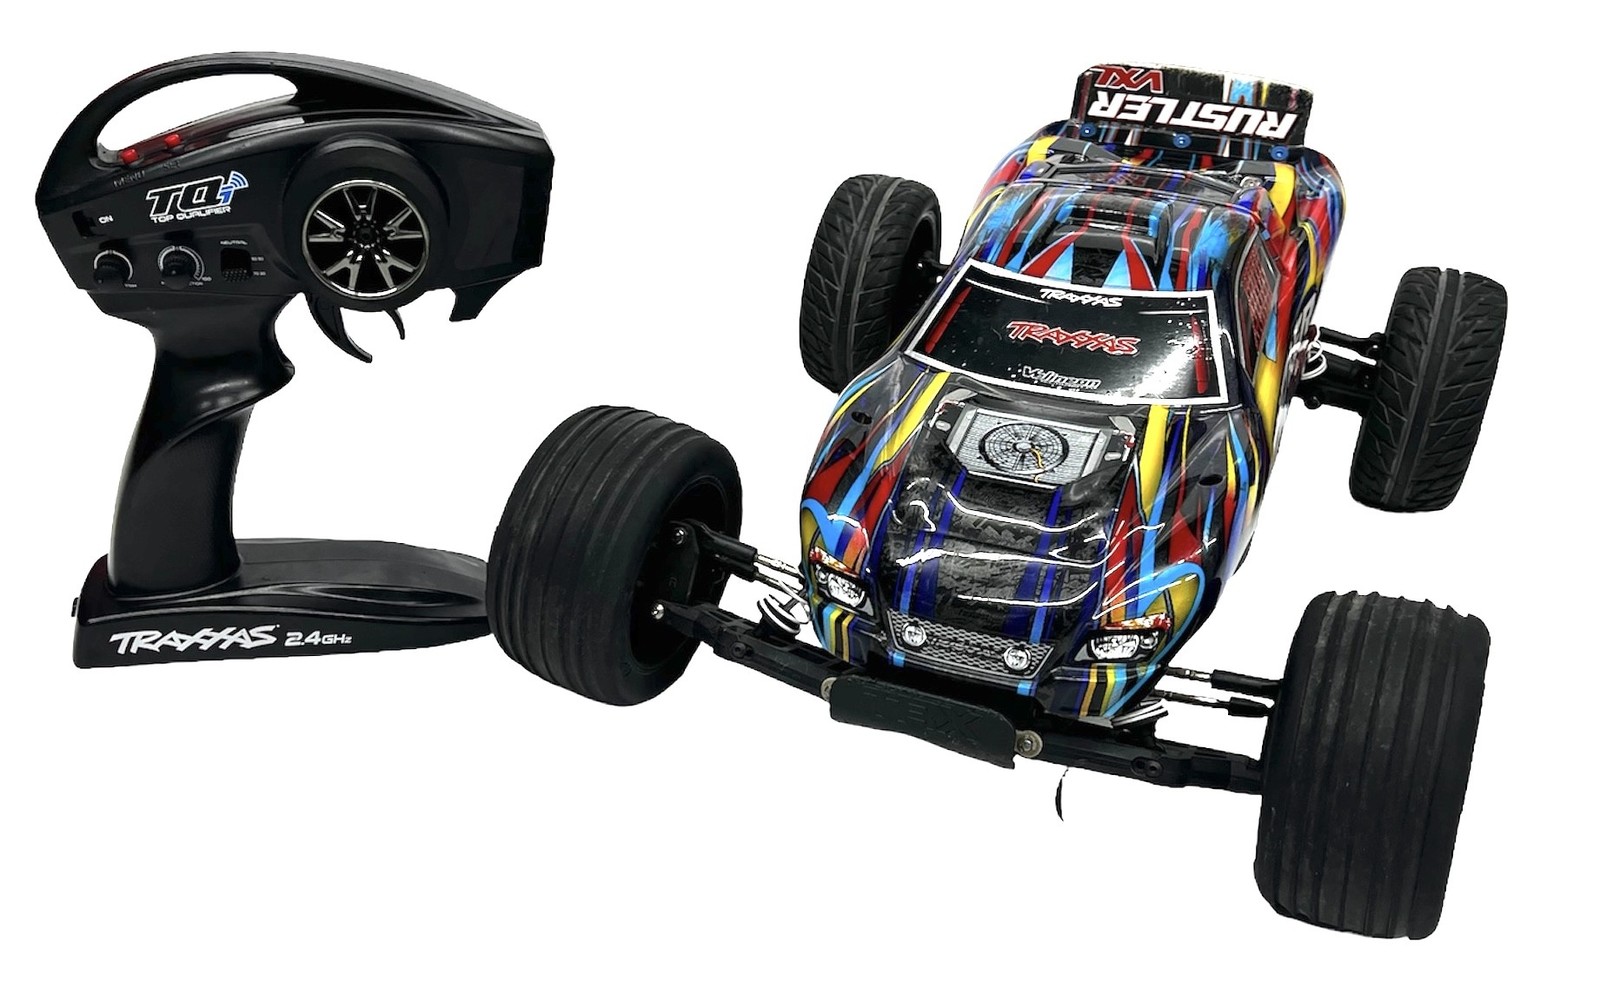 Primary image for Traxxas Remote Control Cars Rustler 4x4 vxl 410034